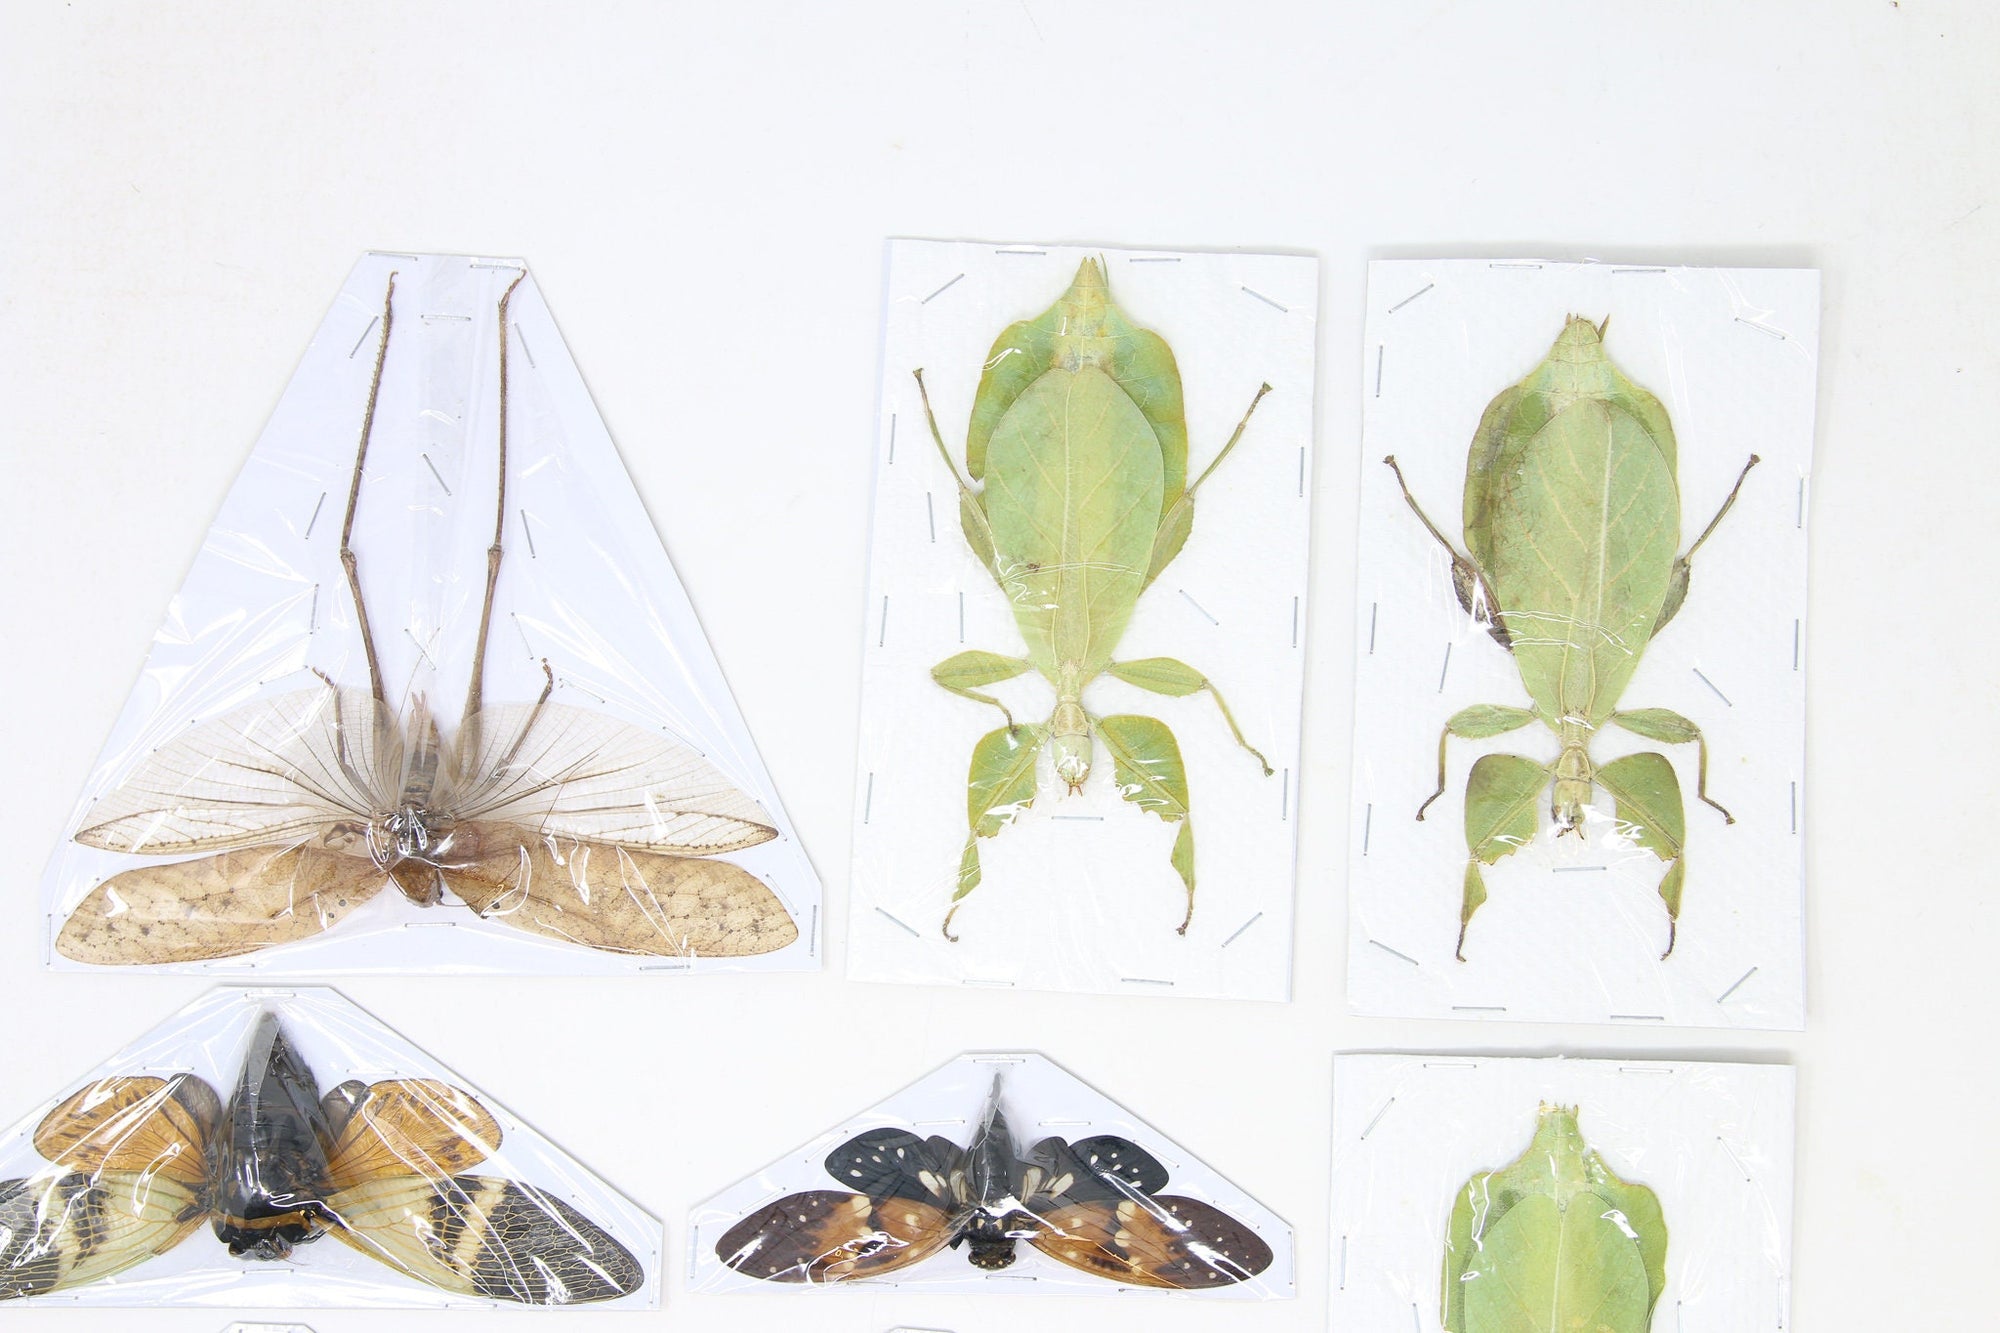 Mixed Assorted Insects Bug Collection, A1 Quality Real Dry-Preserved Specimens, Entomology Taxidermy Curiosities (LOT*008)